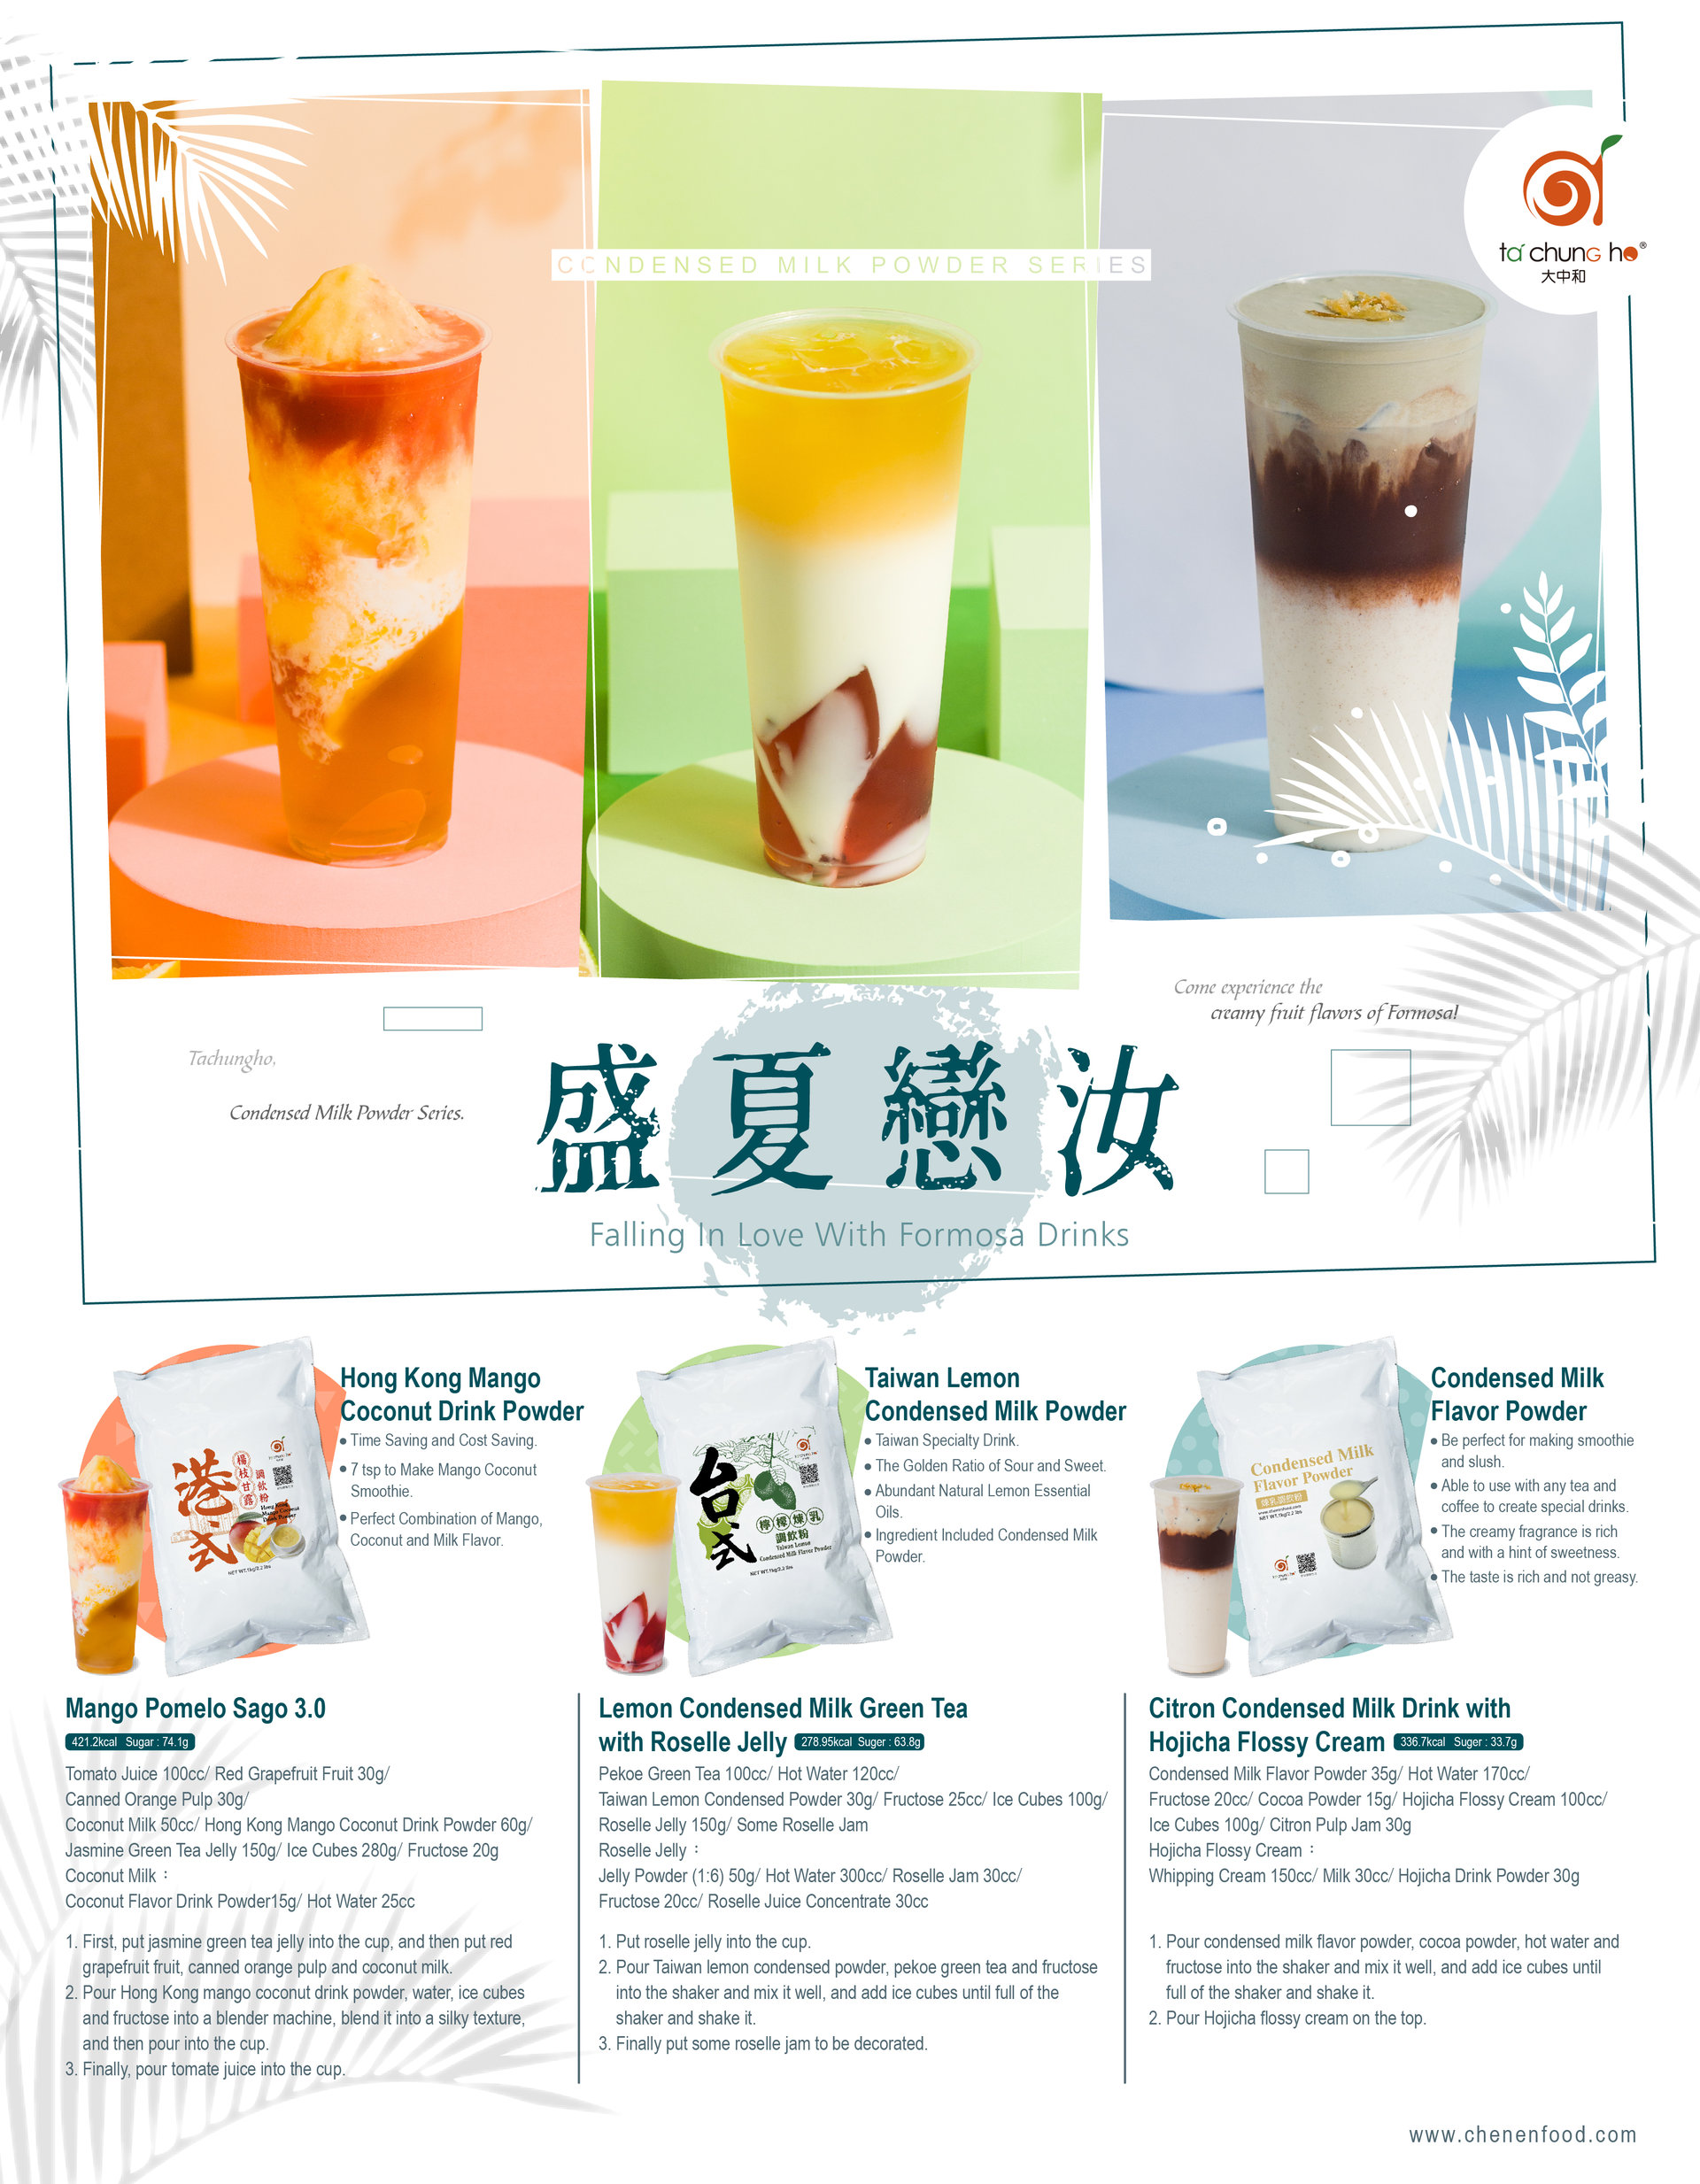 【New Product launch】Falling In love With Formosa Drink